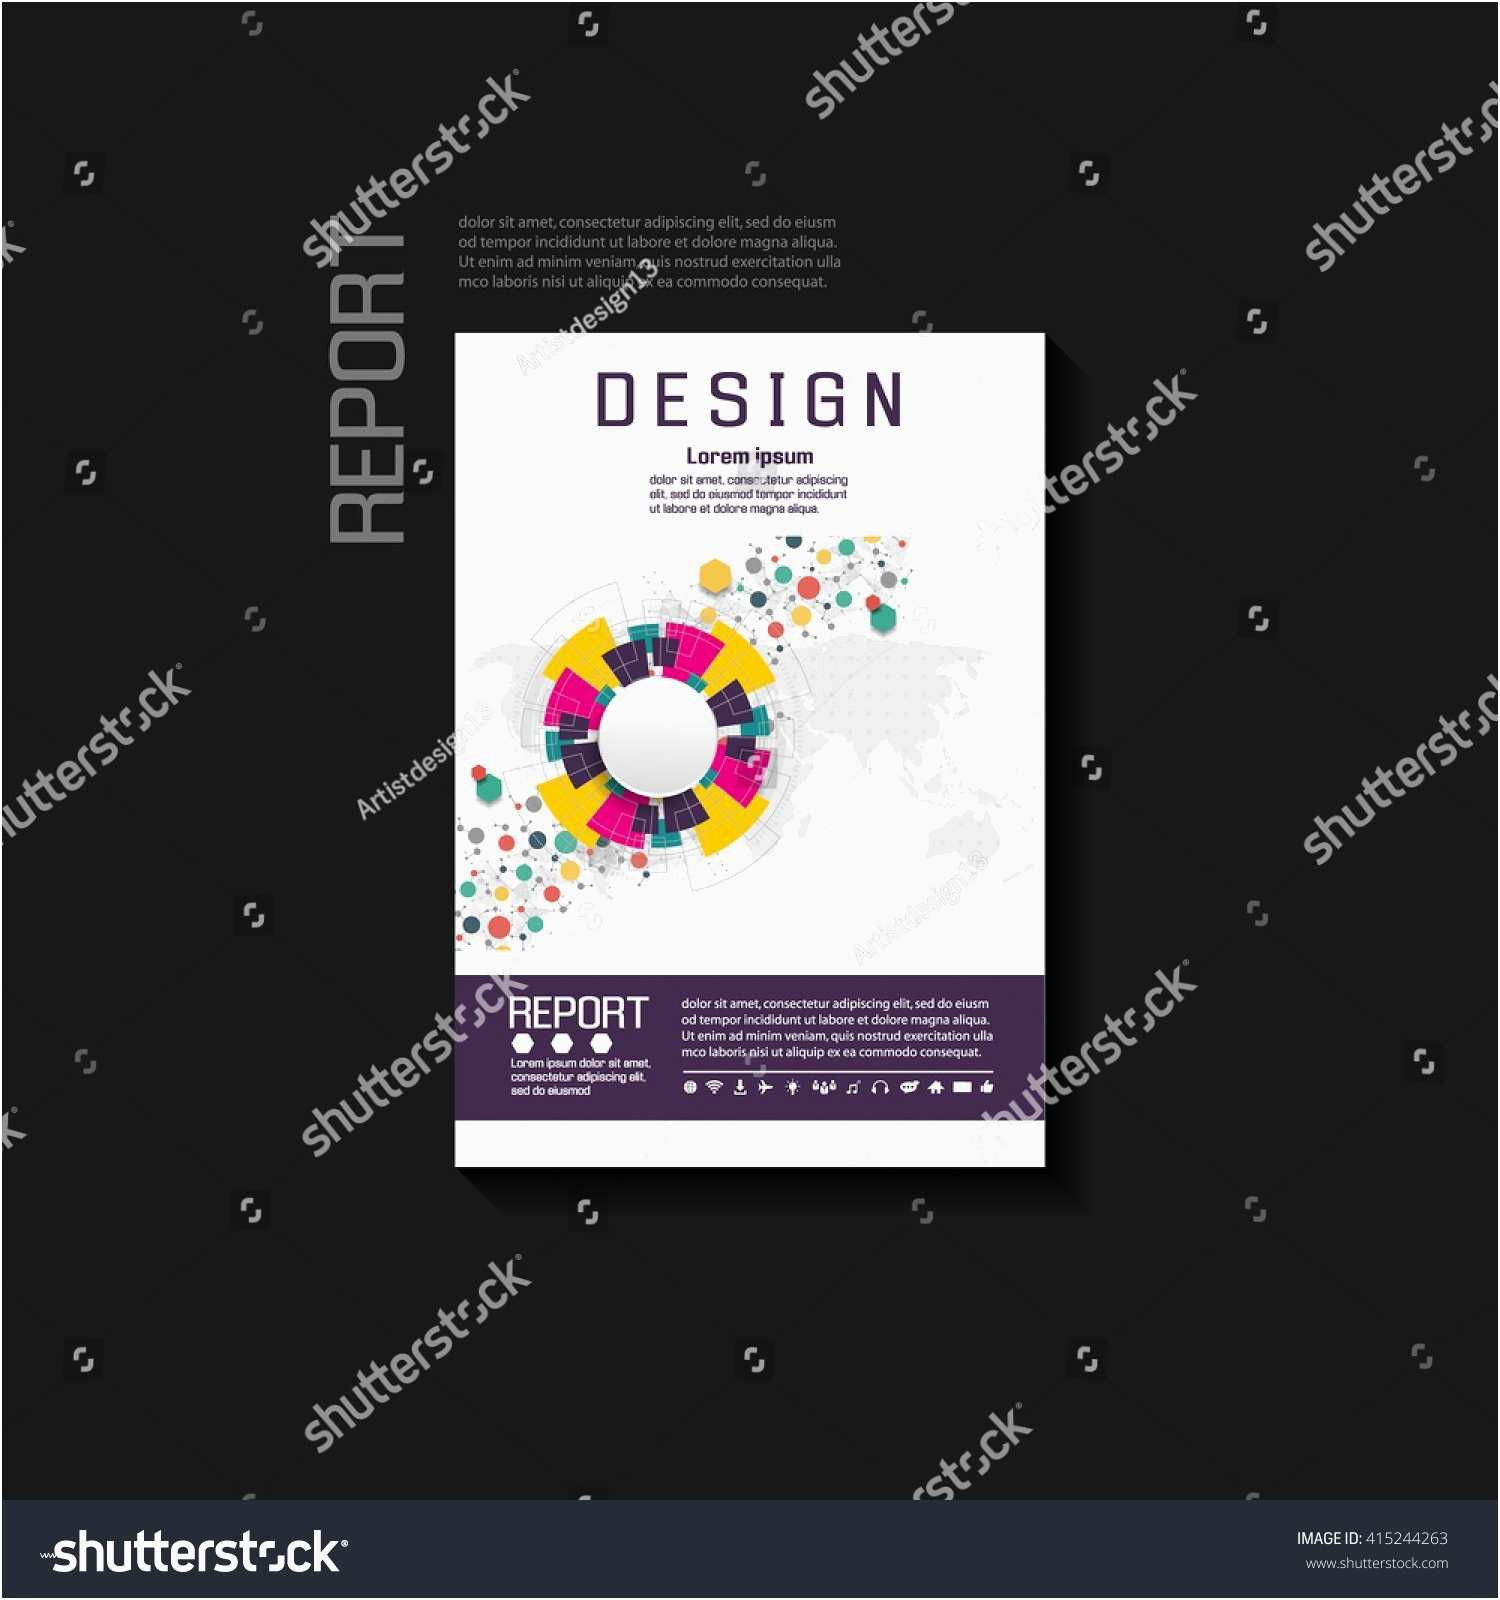 Personal Business Card Template Illustrator Free Word Of Business Card Templates Illustrator